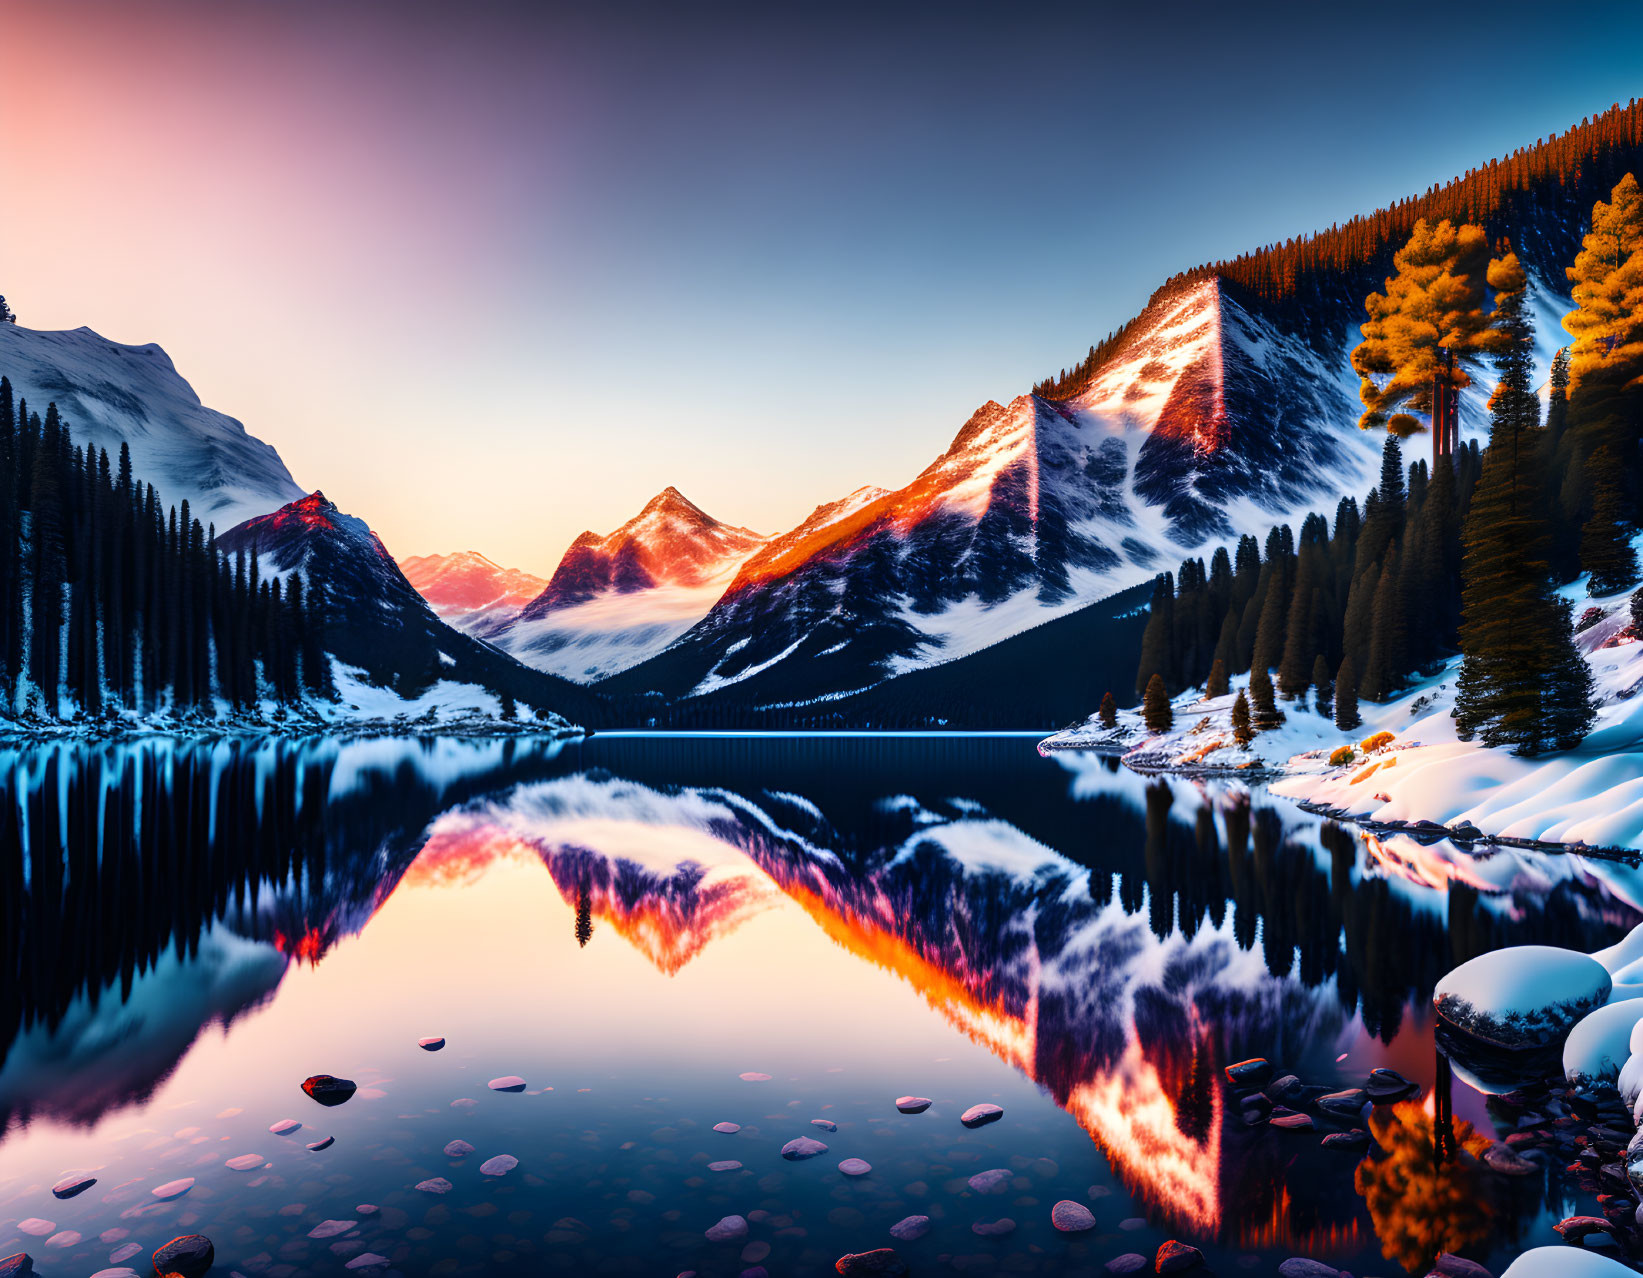 Scenic sunrise over mountain lake with snow-capped peaks